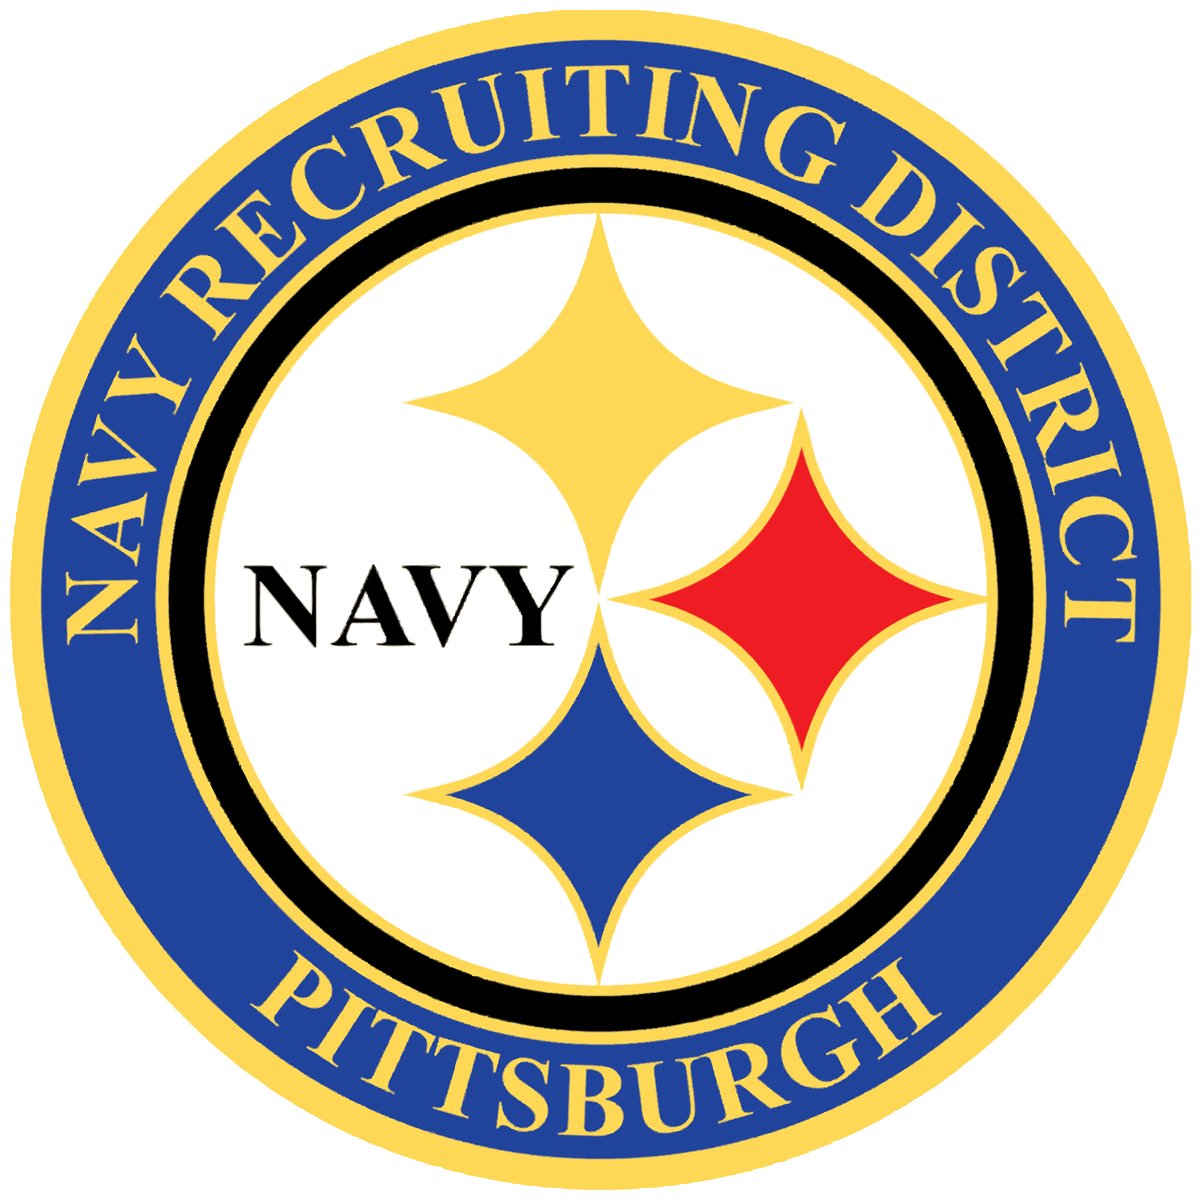 Navy Recruiting District Pittsburgh recruits highly qualified men and women throughout PA, NY, WV and western MD to become Officer and Enlisted Sailors.